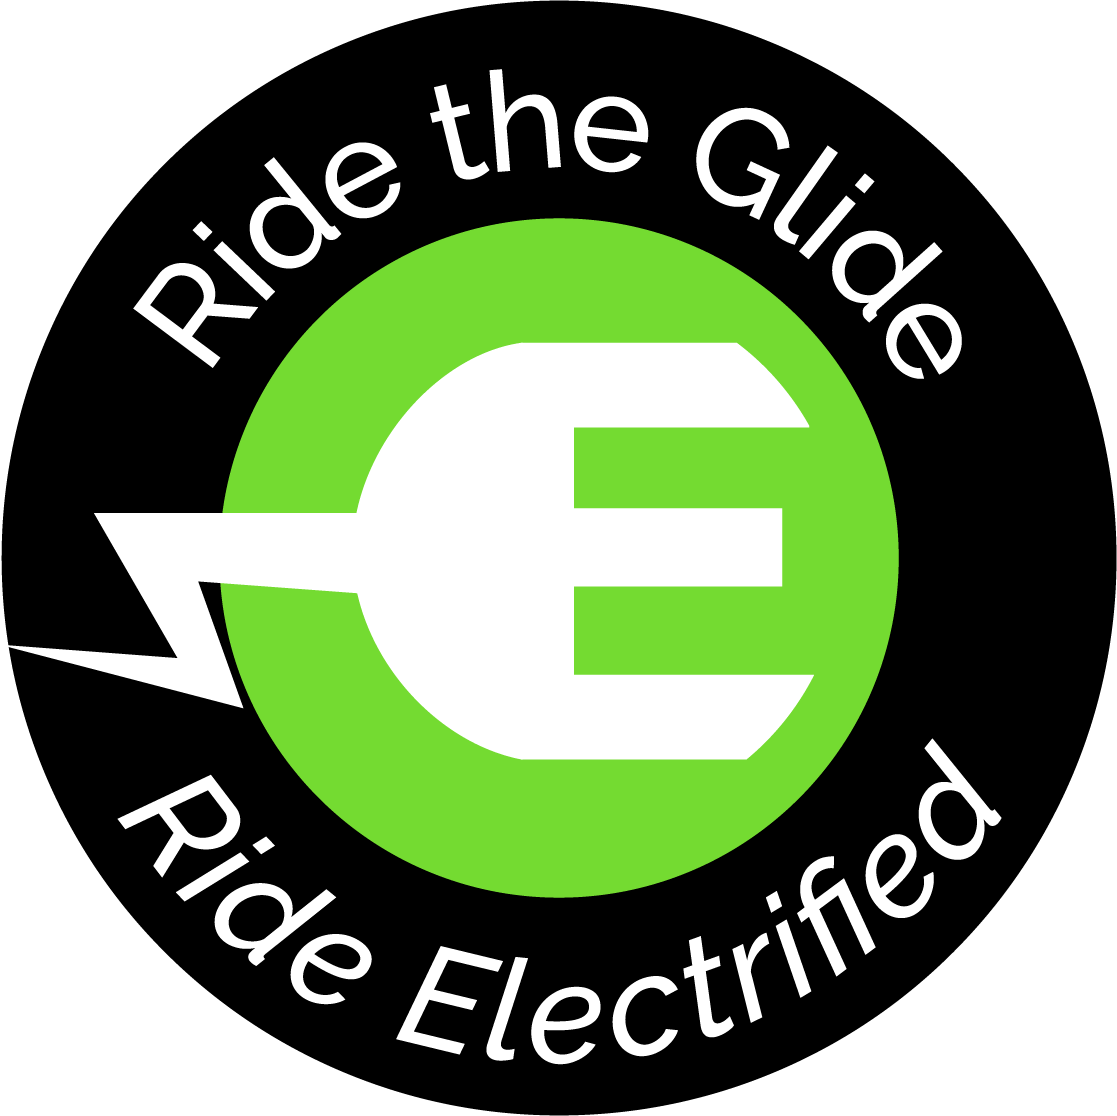 Ride the Glide - Ride Electrified